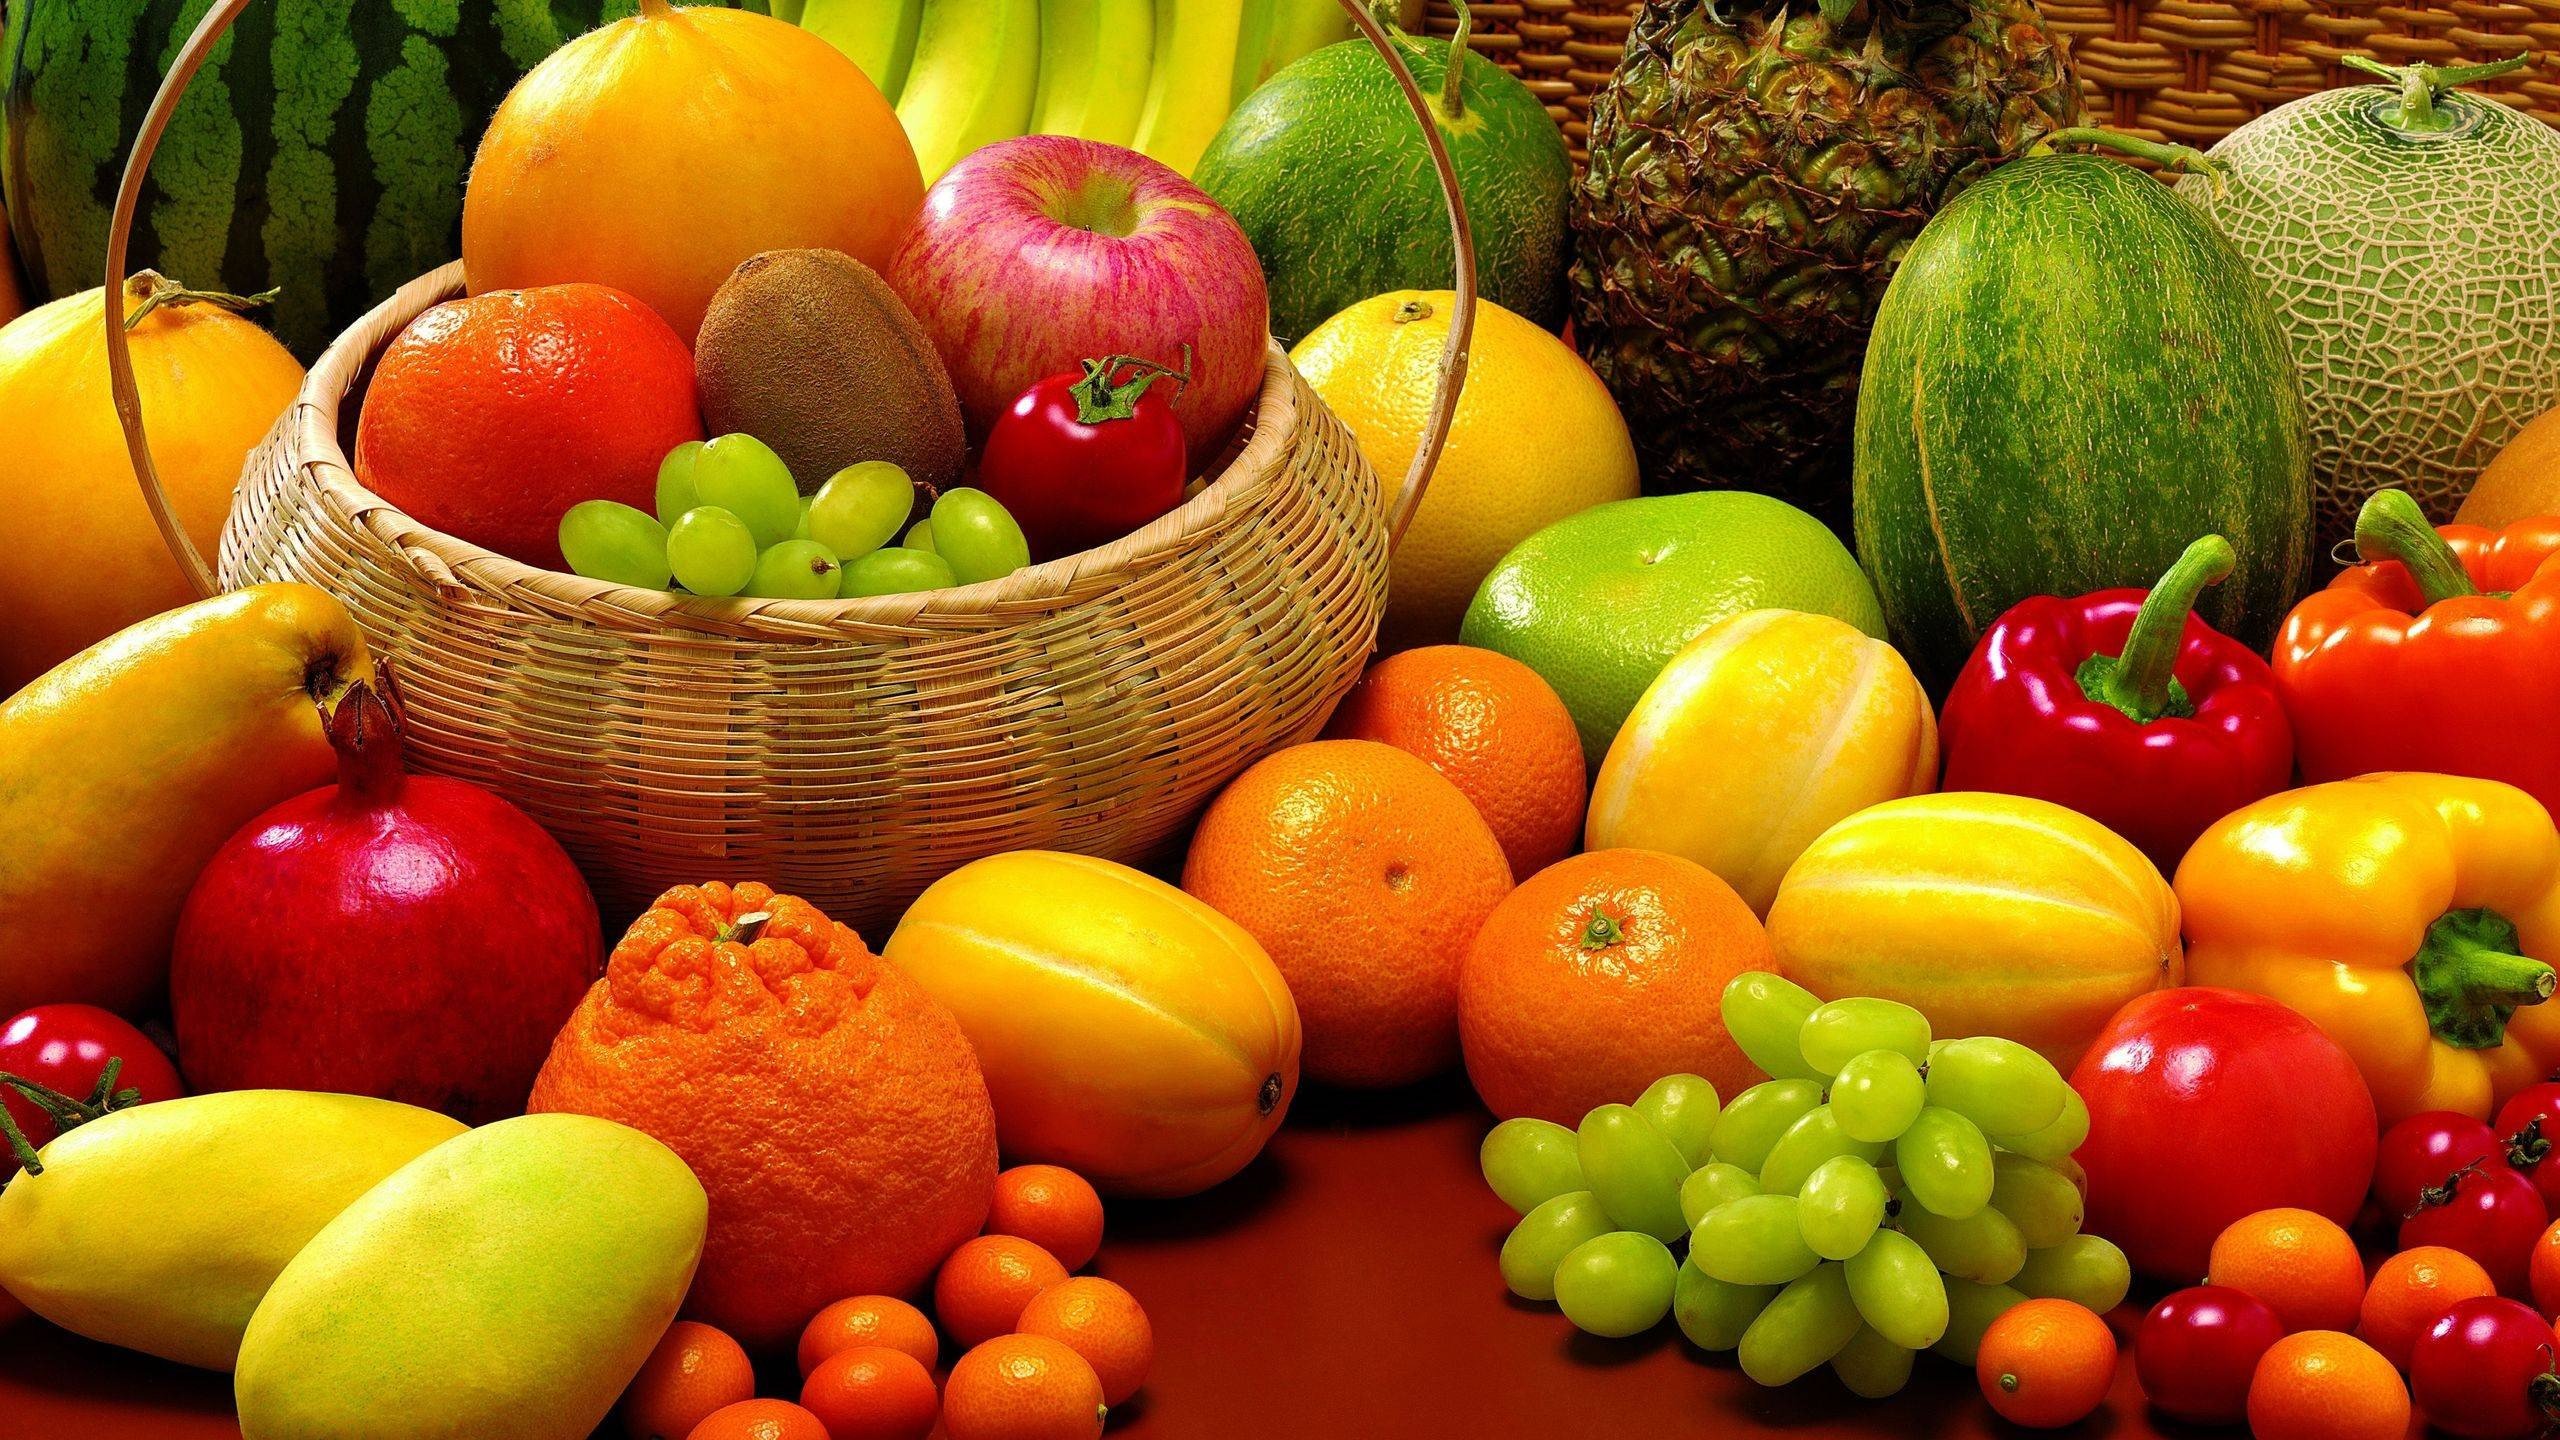 grapes, Orange (fruit), Baskets, Pineapples, Peppers, Tomatoes Wallpaper